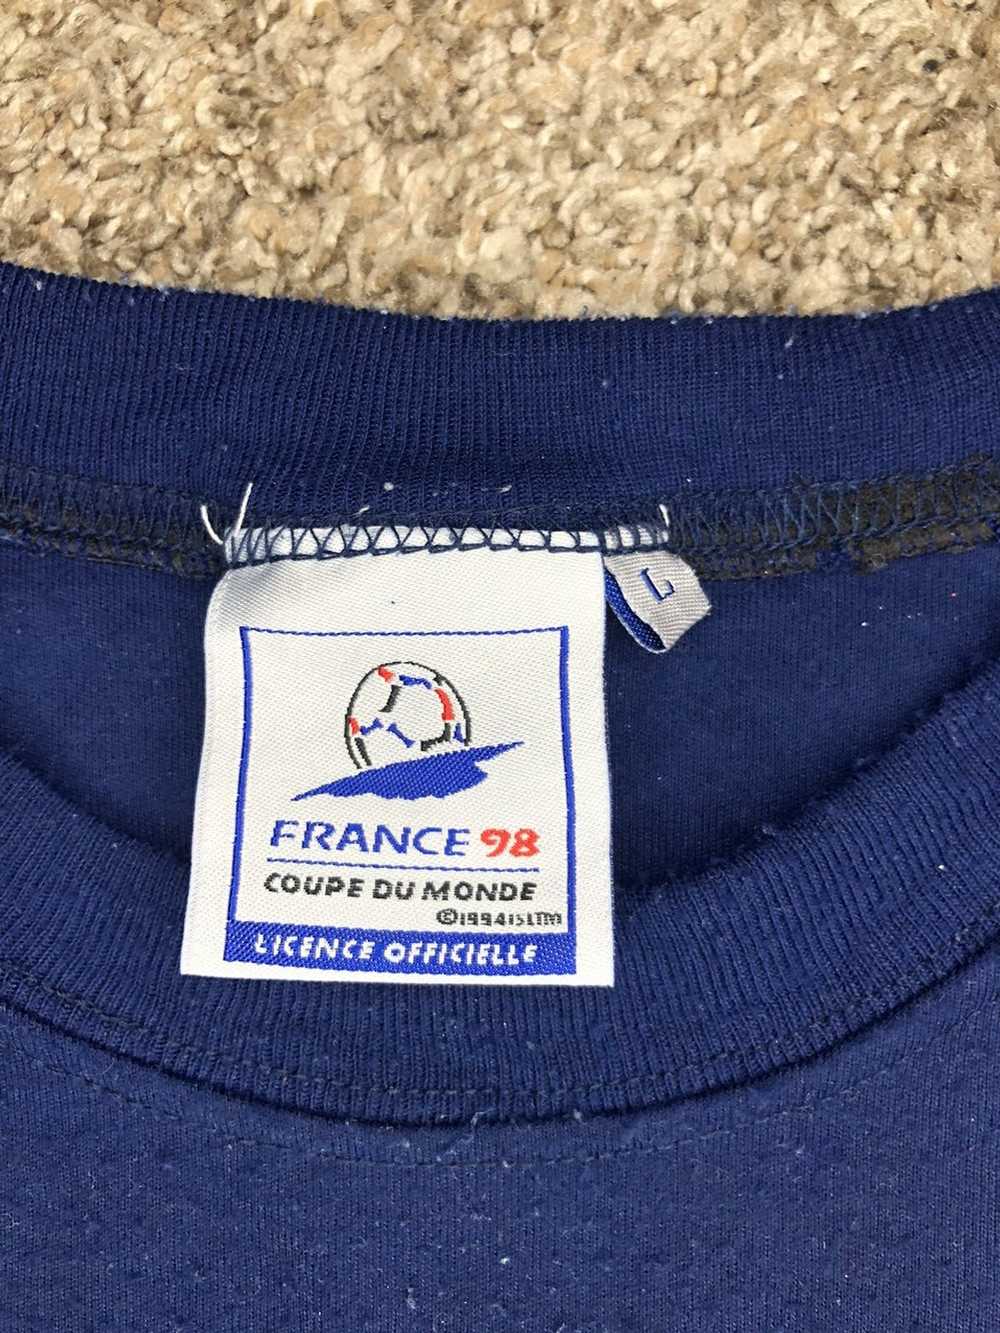 Fifa World Cup × Vintage 1998 World Cup France Tee - image 3